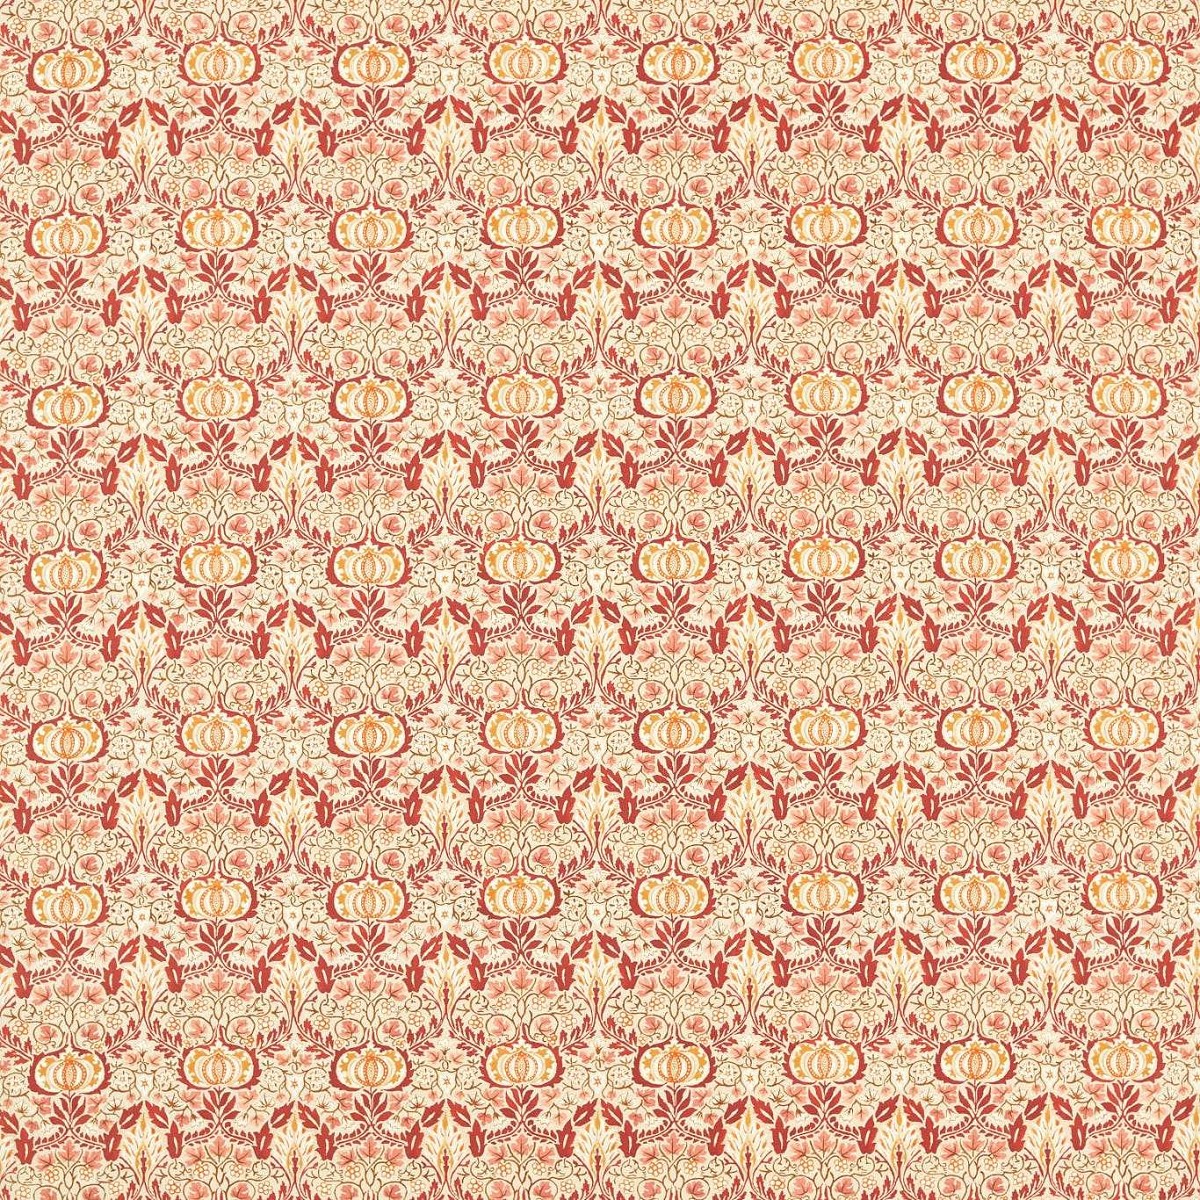 Little Chintz Russet Fabric by William Morris & Co.